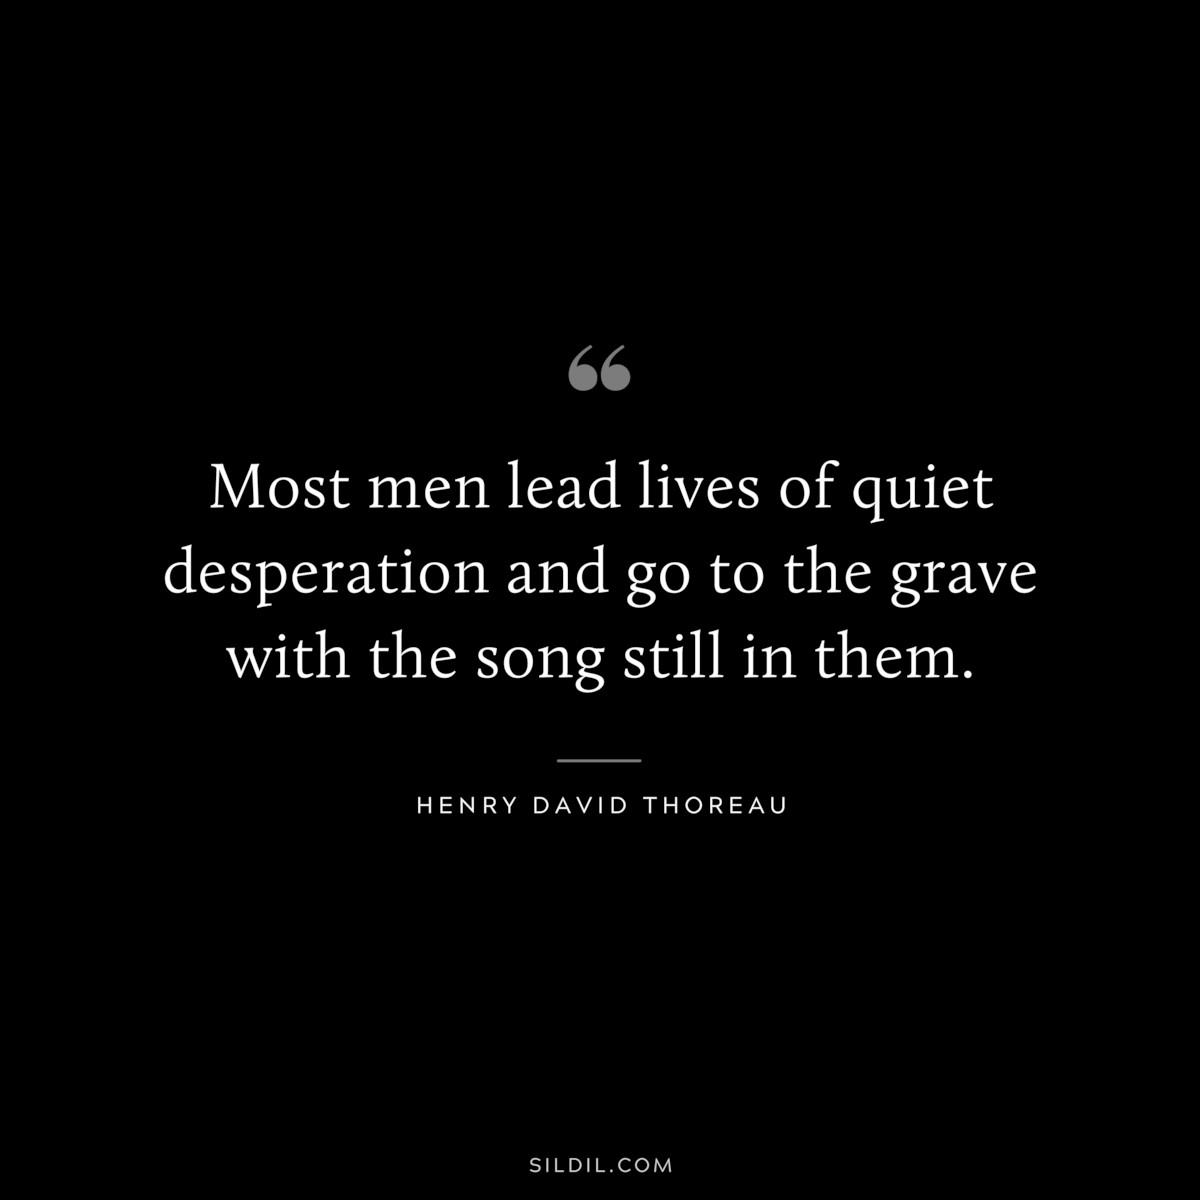 Most men lead lives of quiet desperation and go to the grave with the song still in them. — Henry David Thoreau